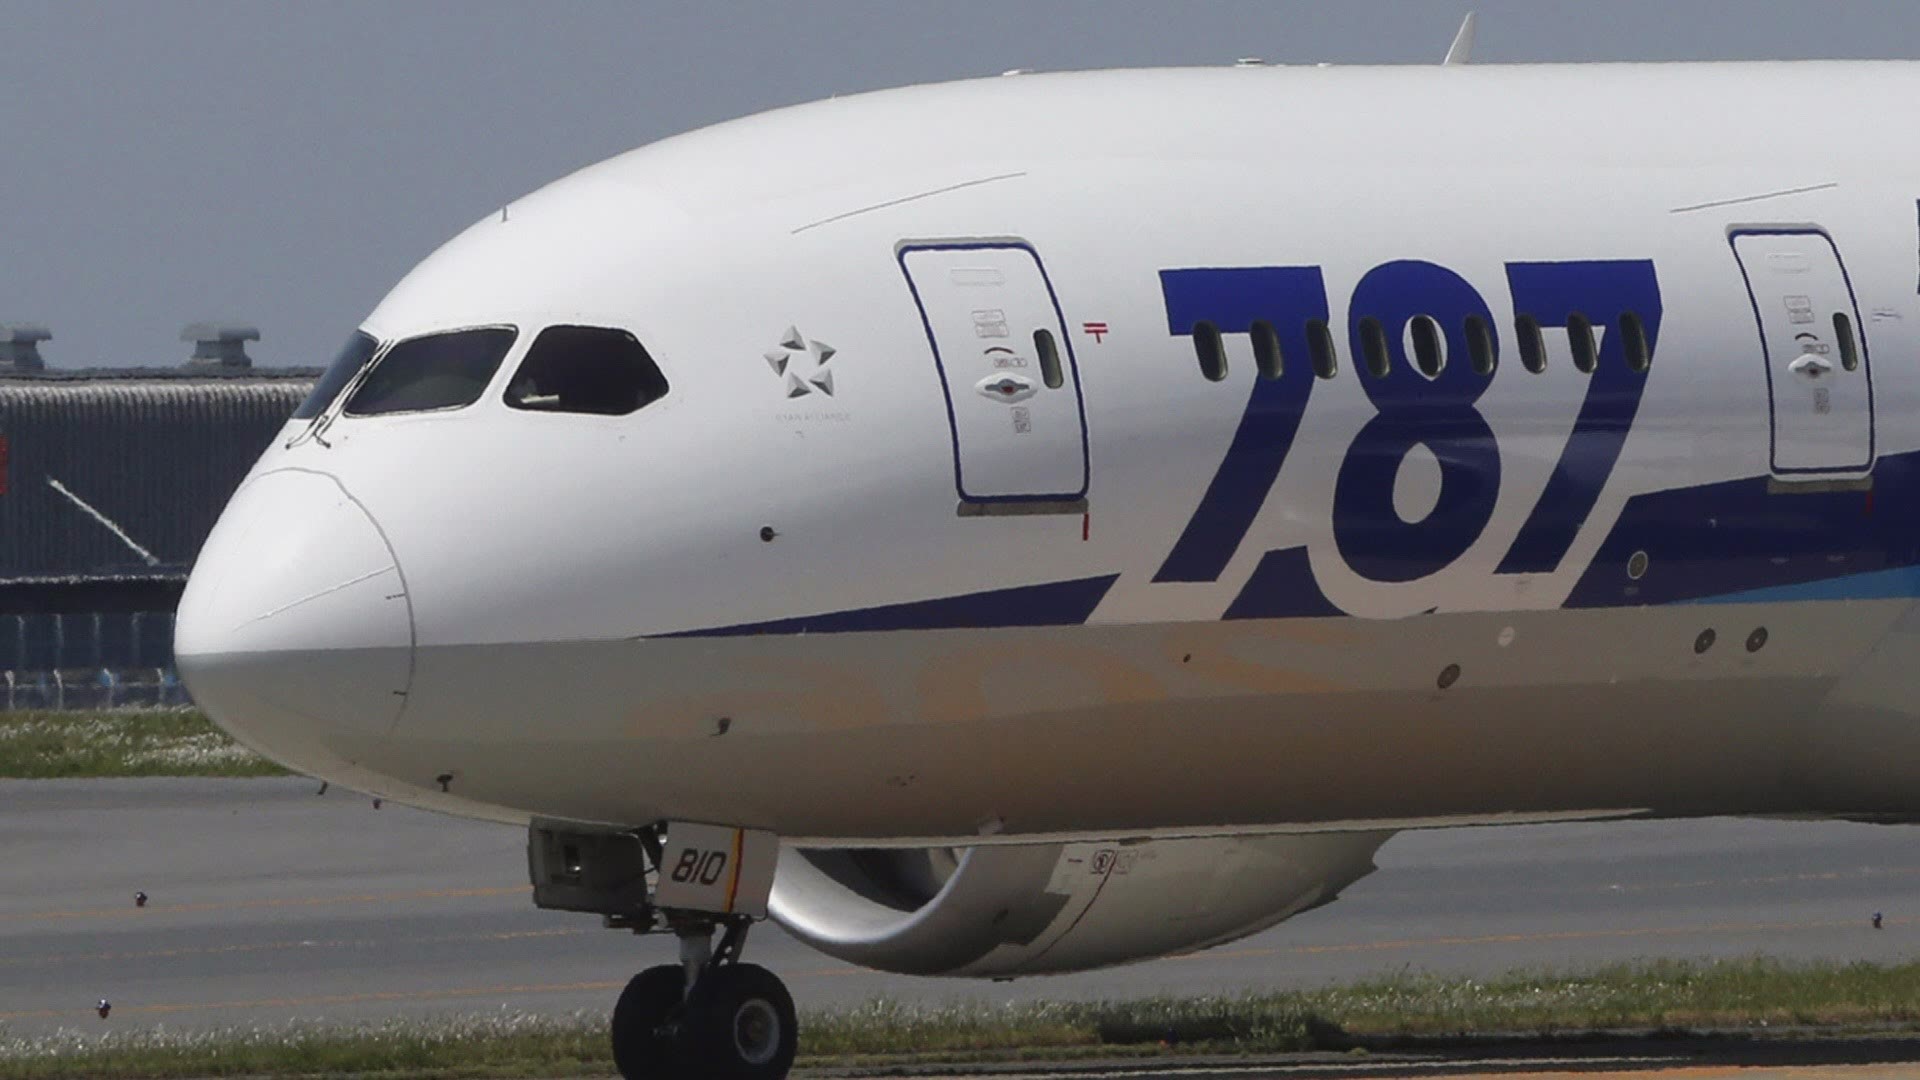 Boeing has halted deliveries on the 787 Dreamliner because the FAA wants more information on how the company is going to resolve issues that caused a previous delay